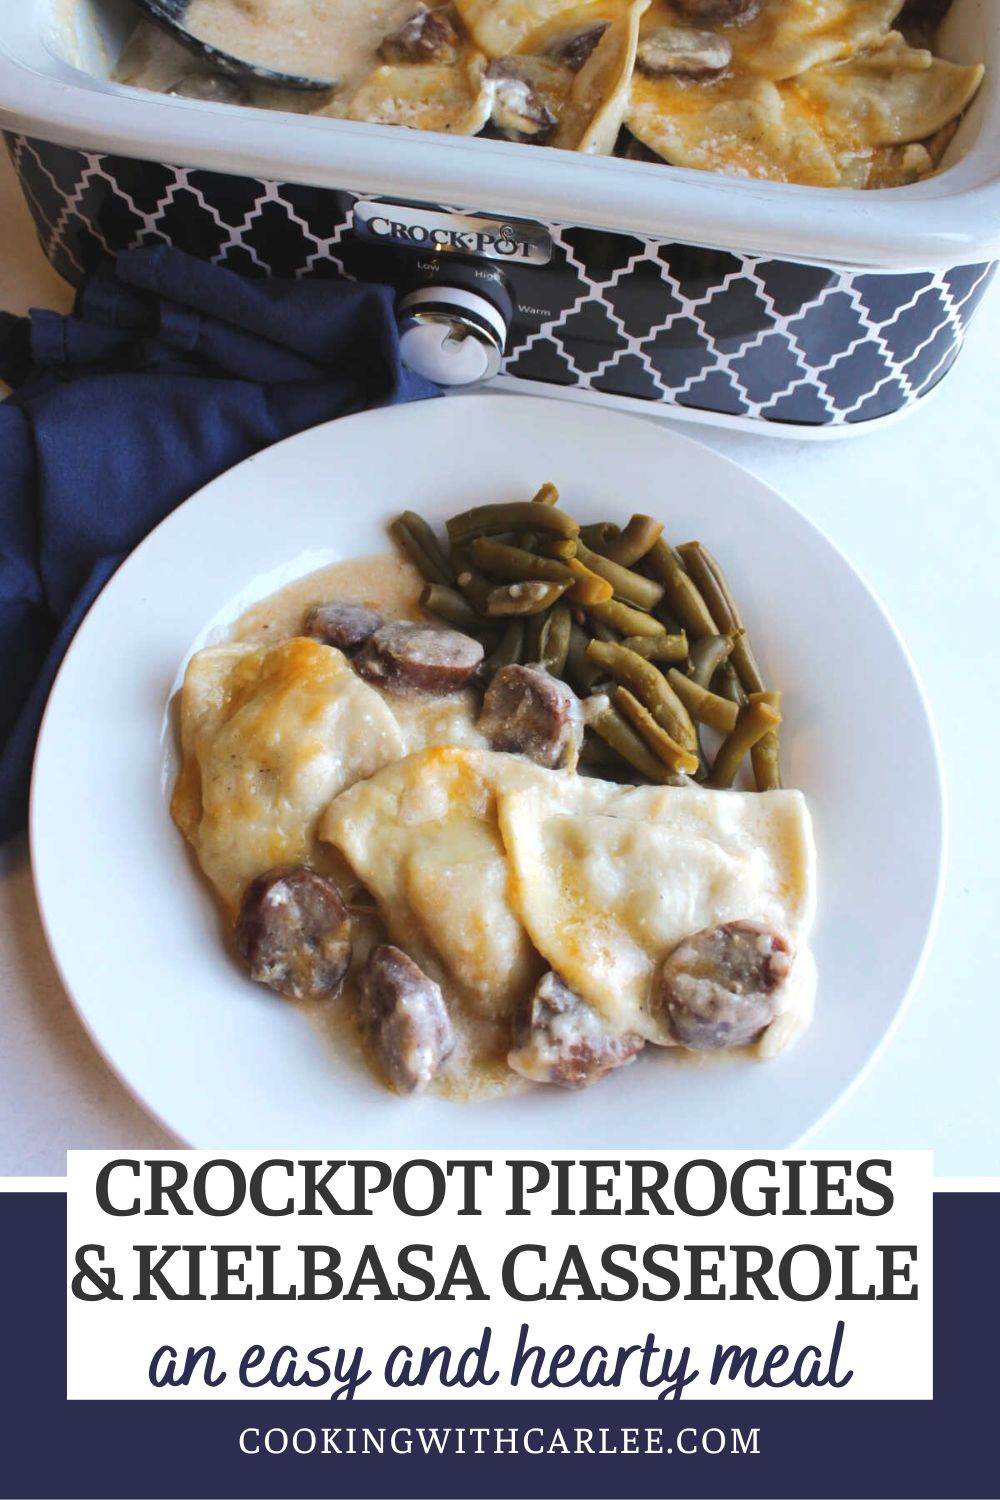 Make creamy pierogis and kielbasa with the help of your Crockpot for an easy and filling meal. This comforting casserole has a creamy sauce and melted cheese to make it an easy and family friendly dinner.